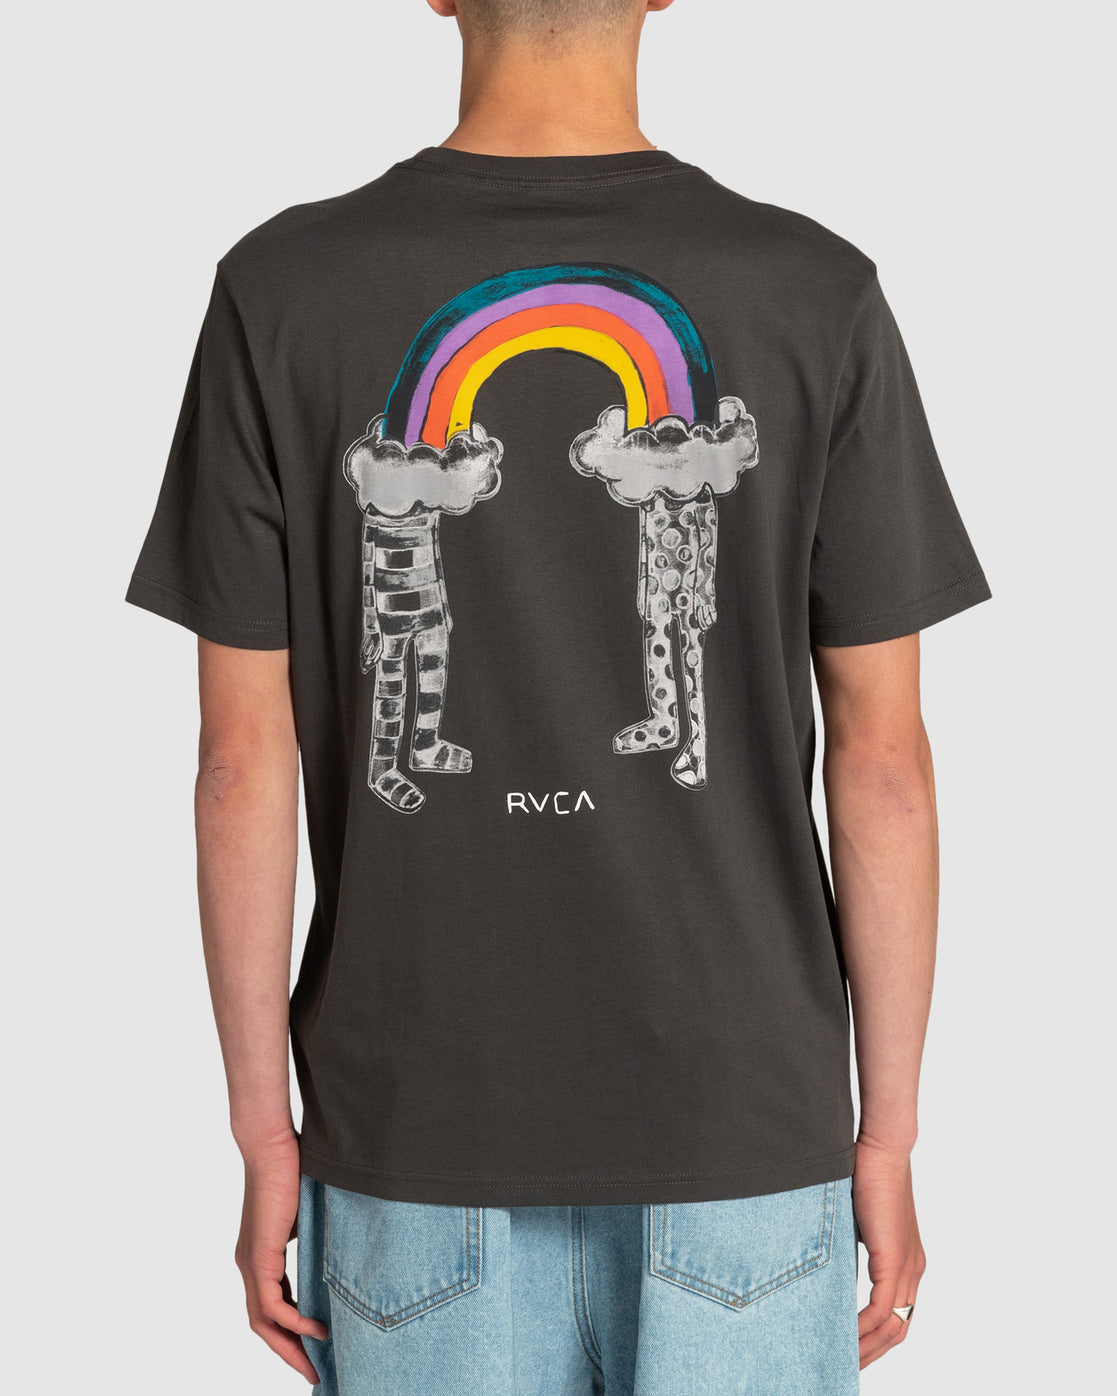 RVCA RAINBOW CONNECTION SS TEE - Pirate Black